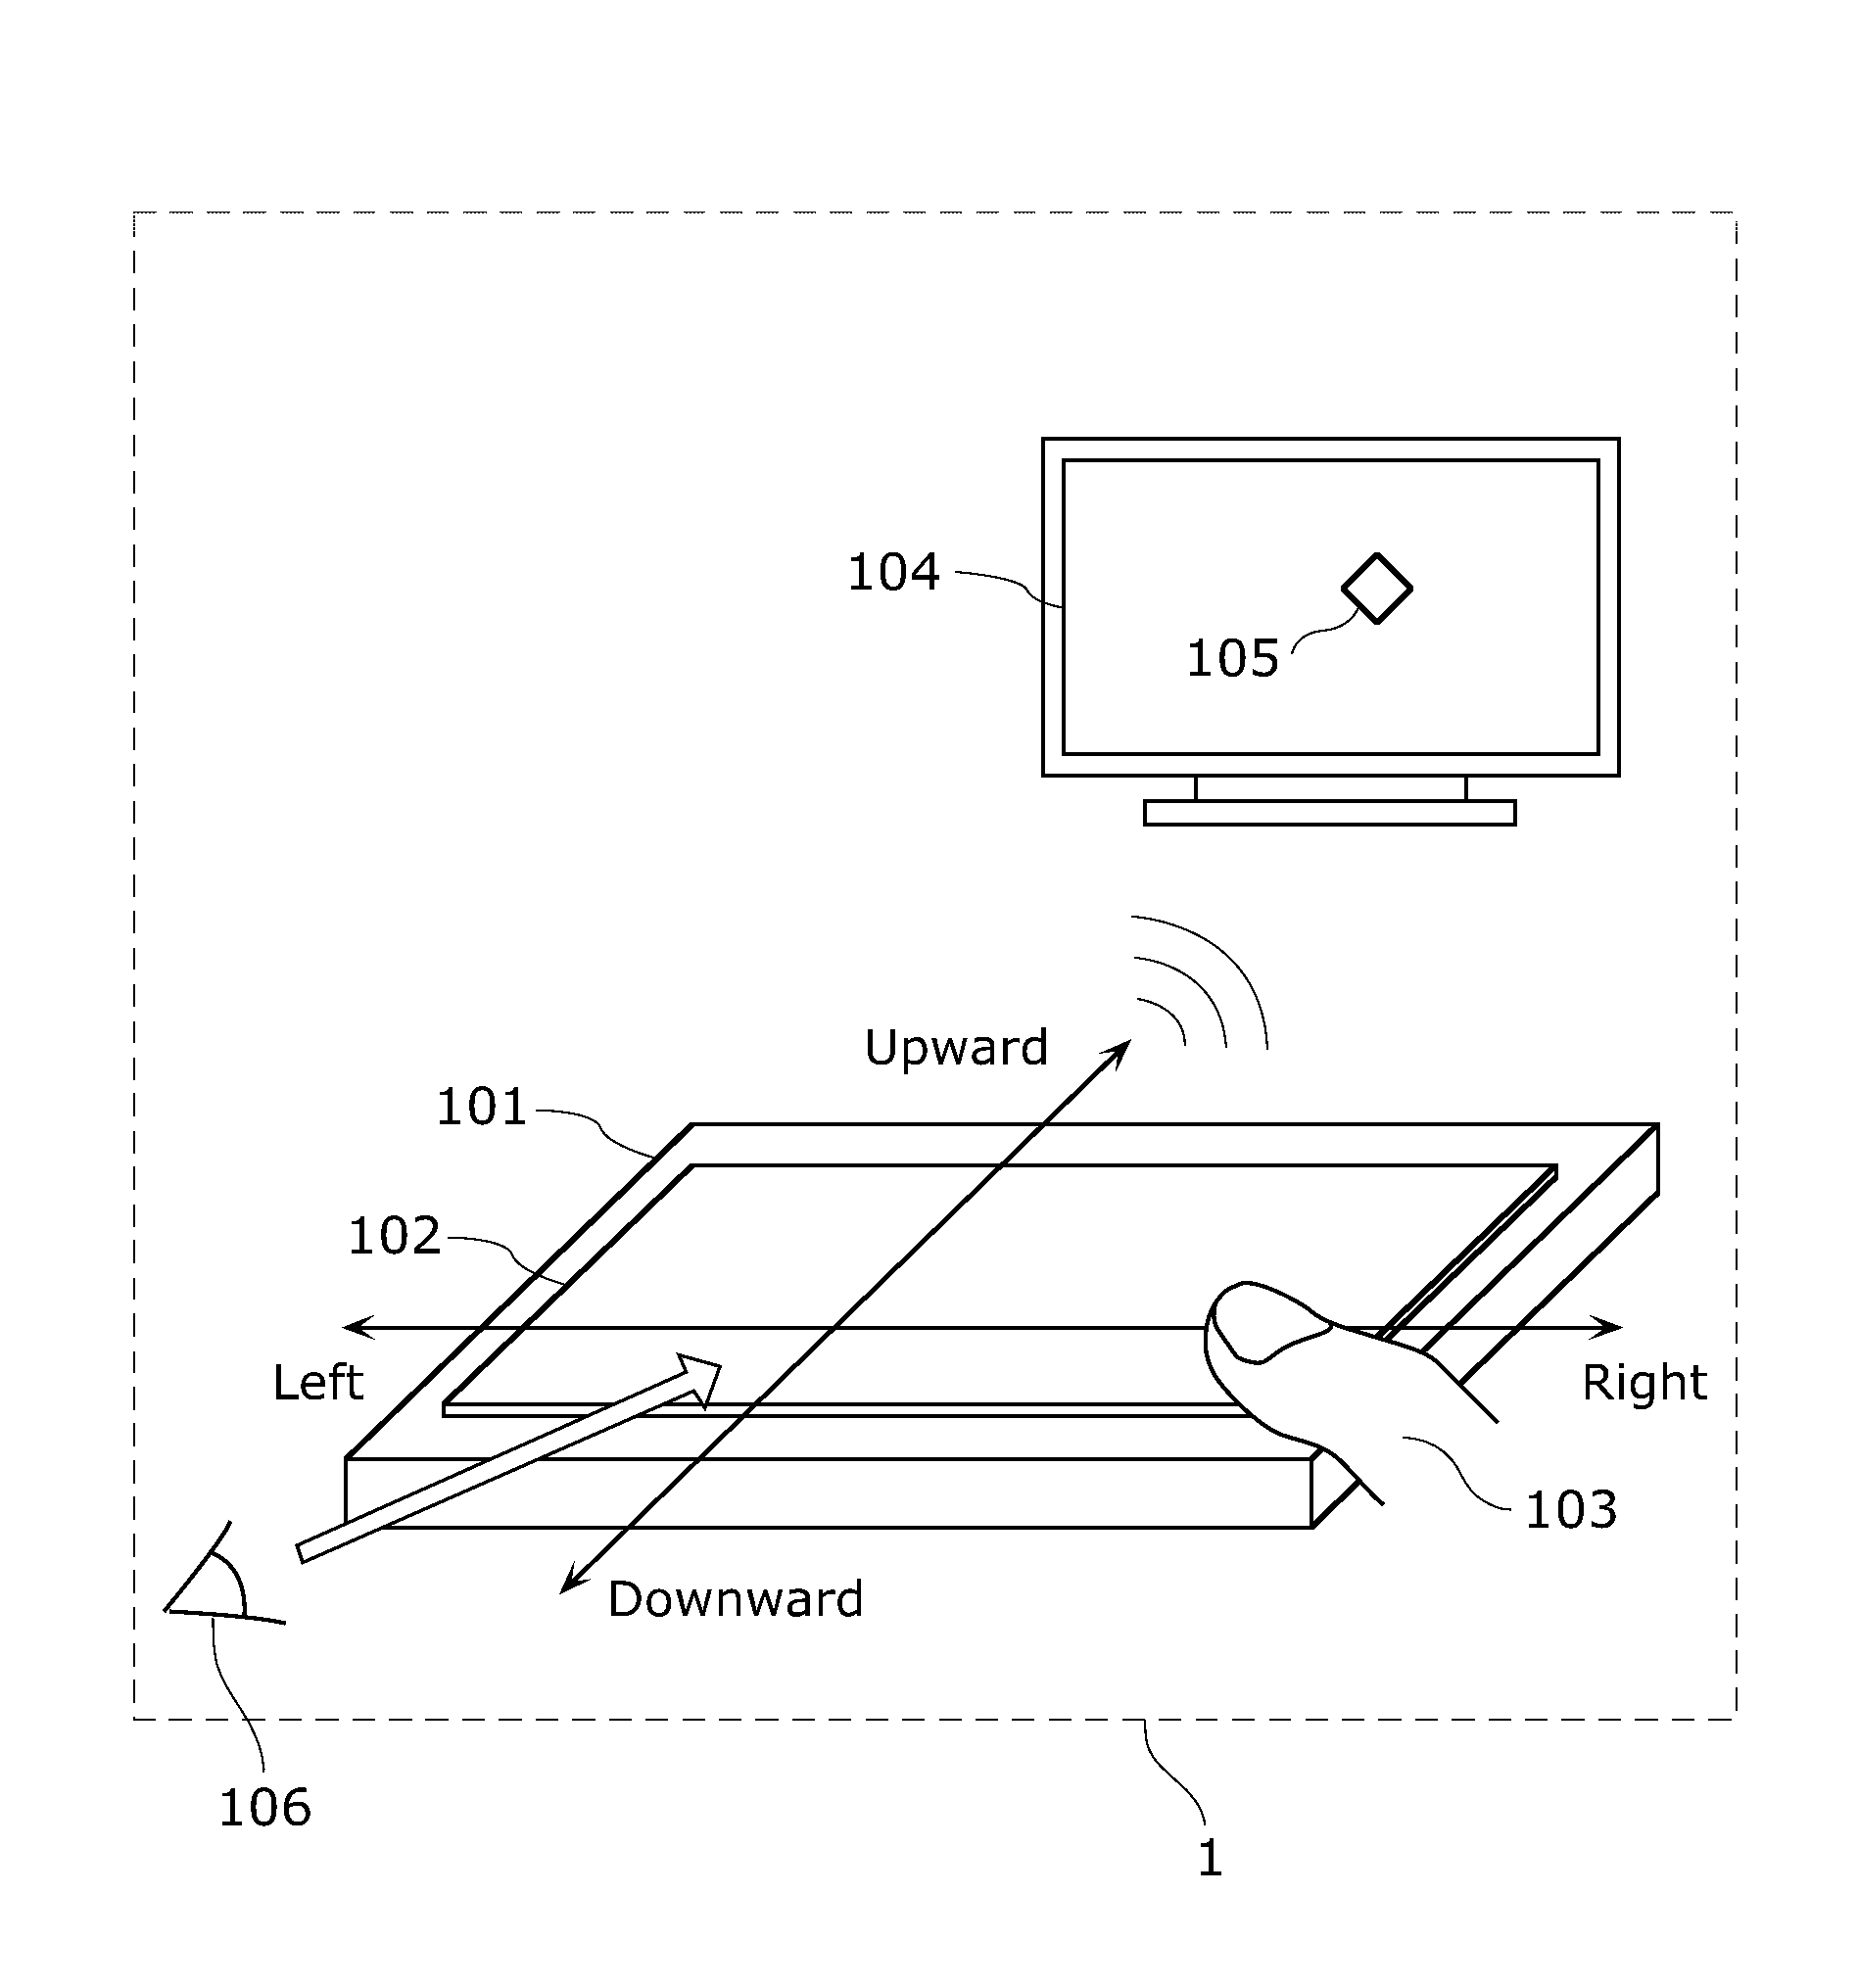 Display control device, method, program, and integrated circuit